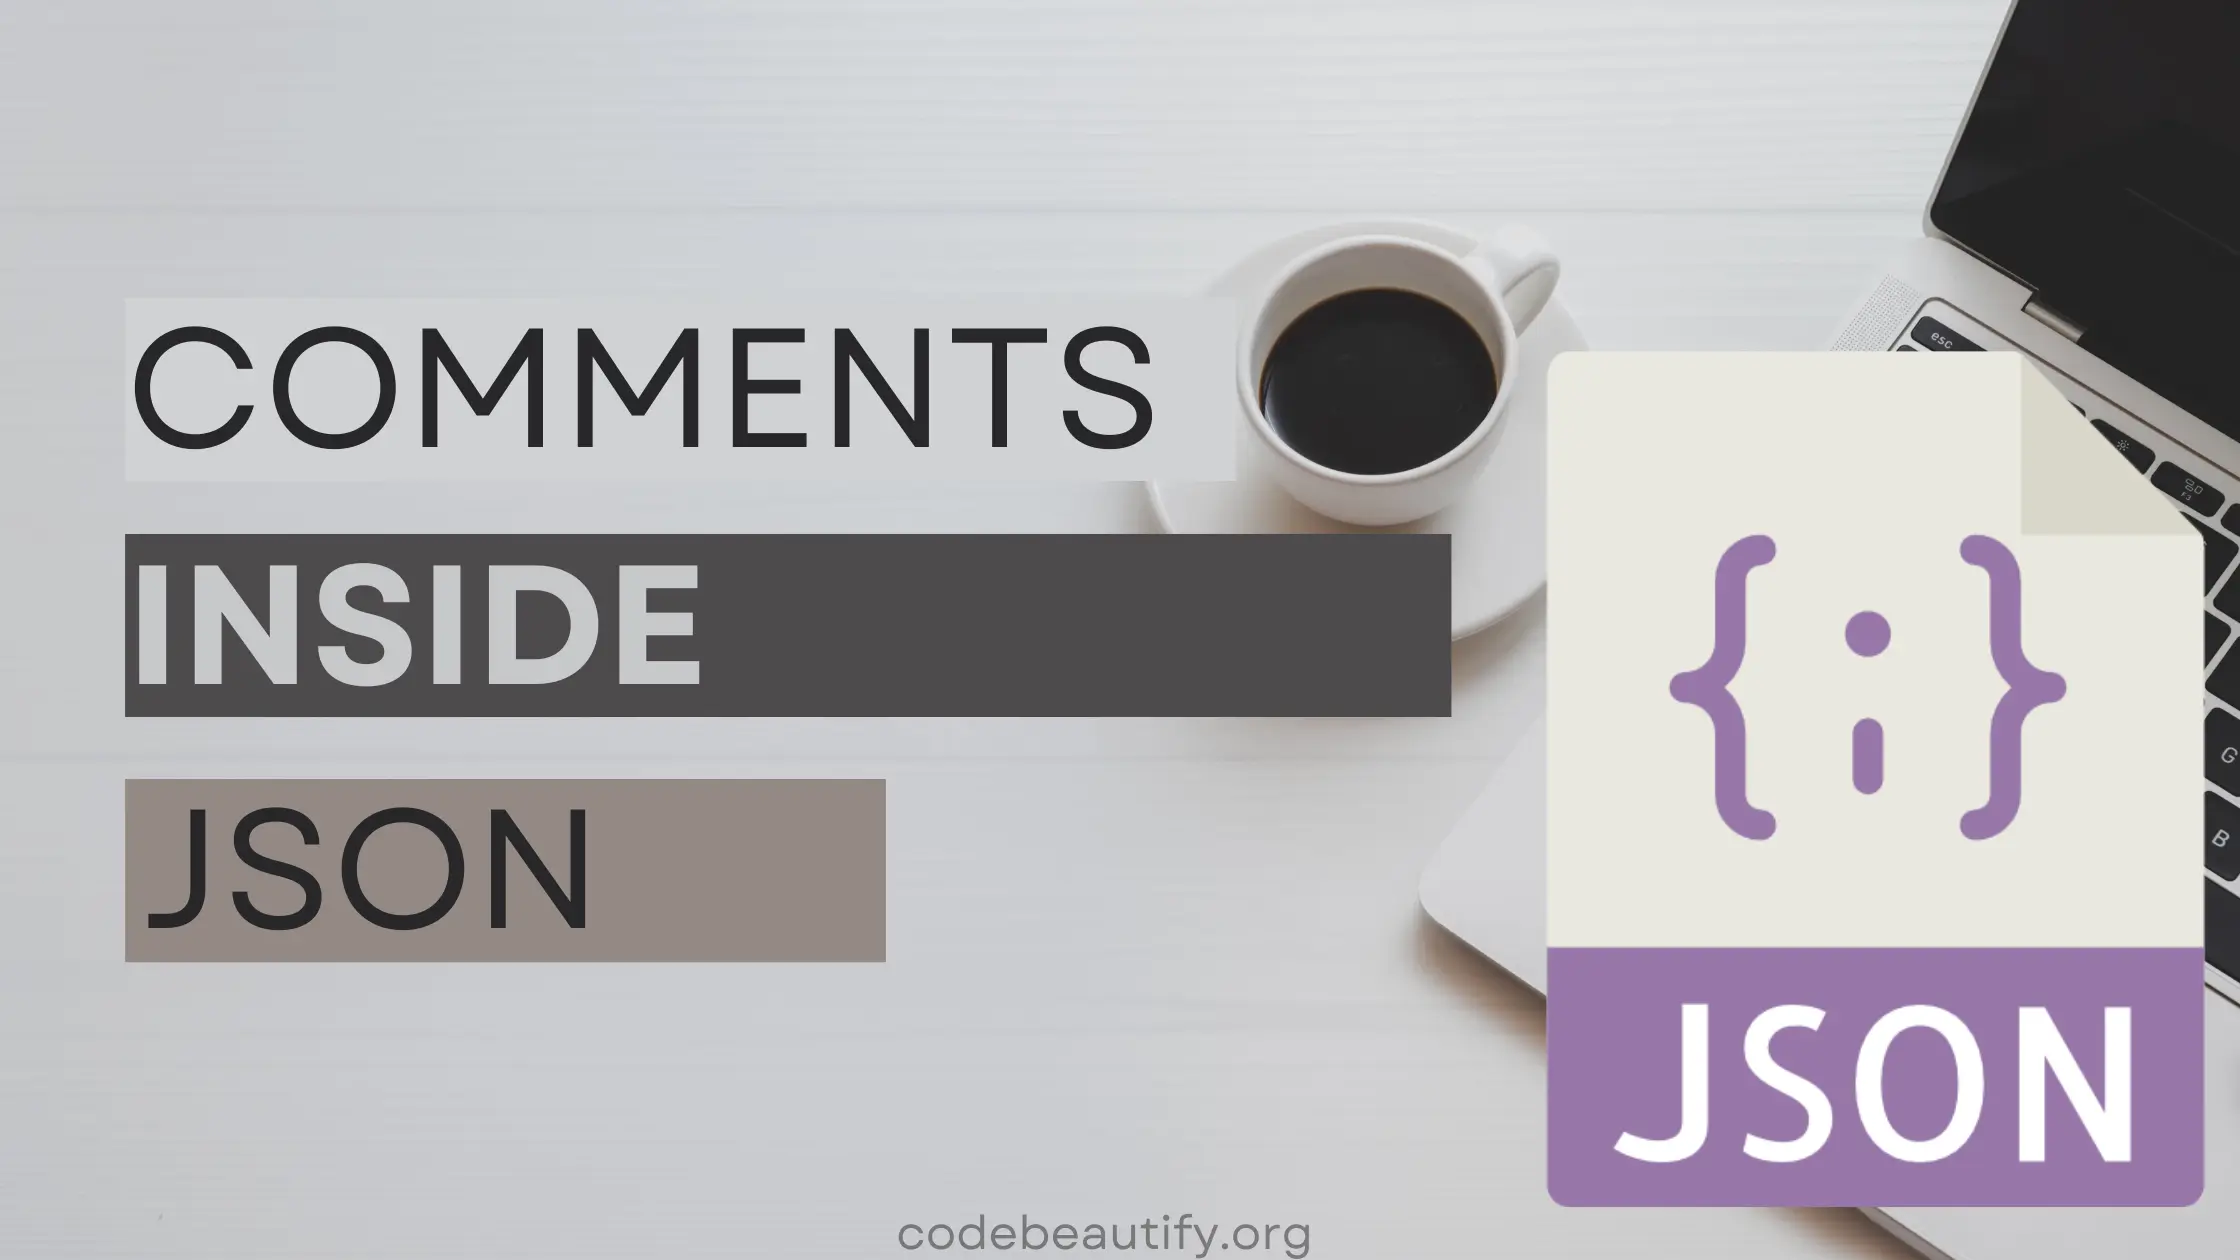 Comment Inside Json : How to add Comments in JSON file?